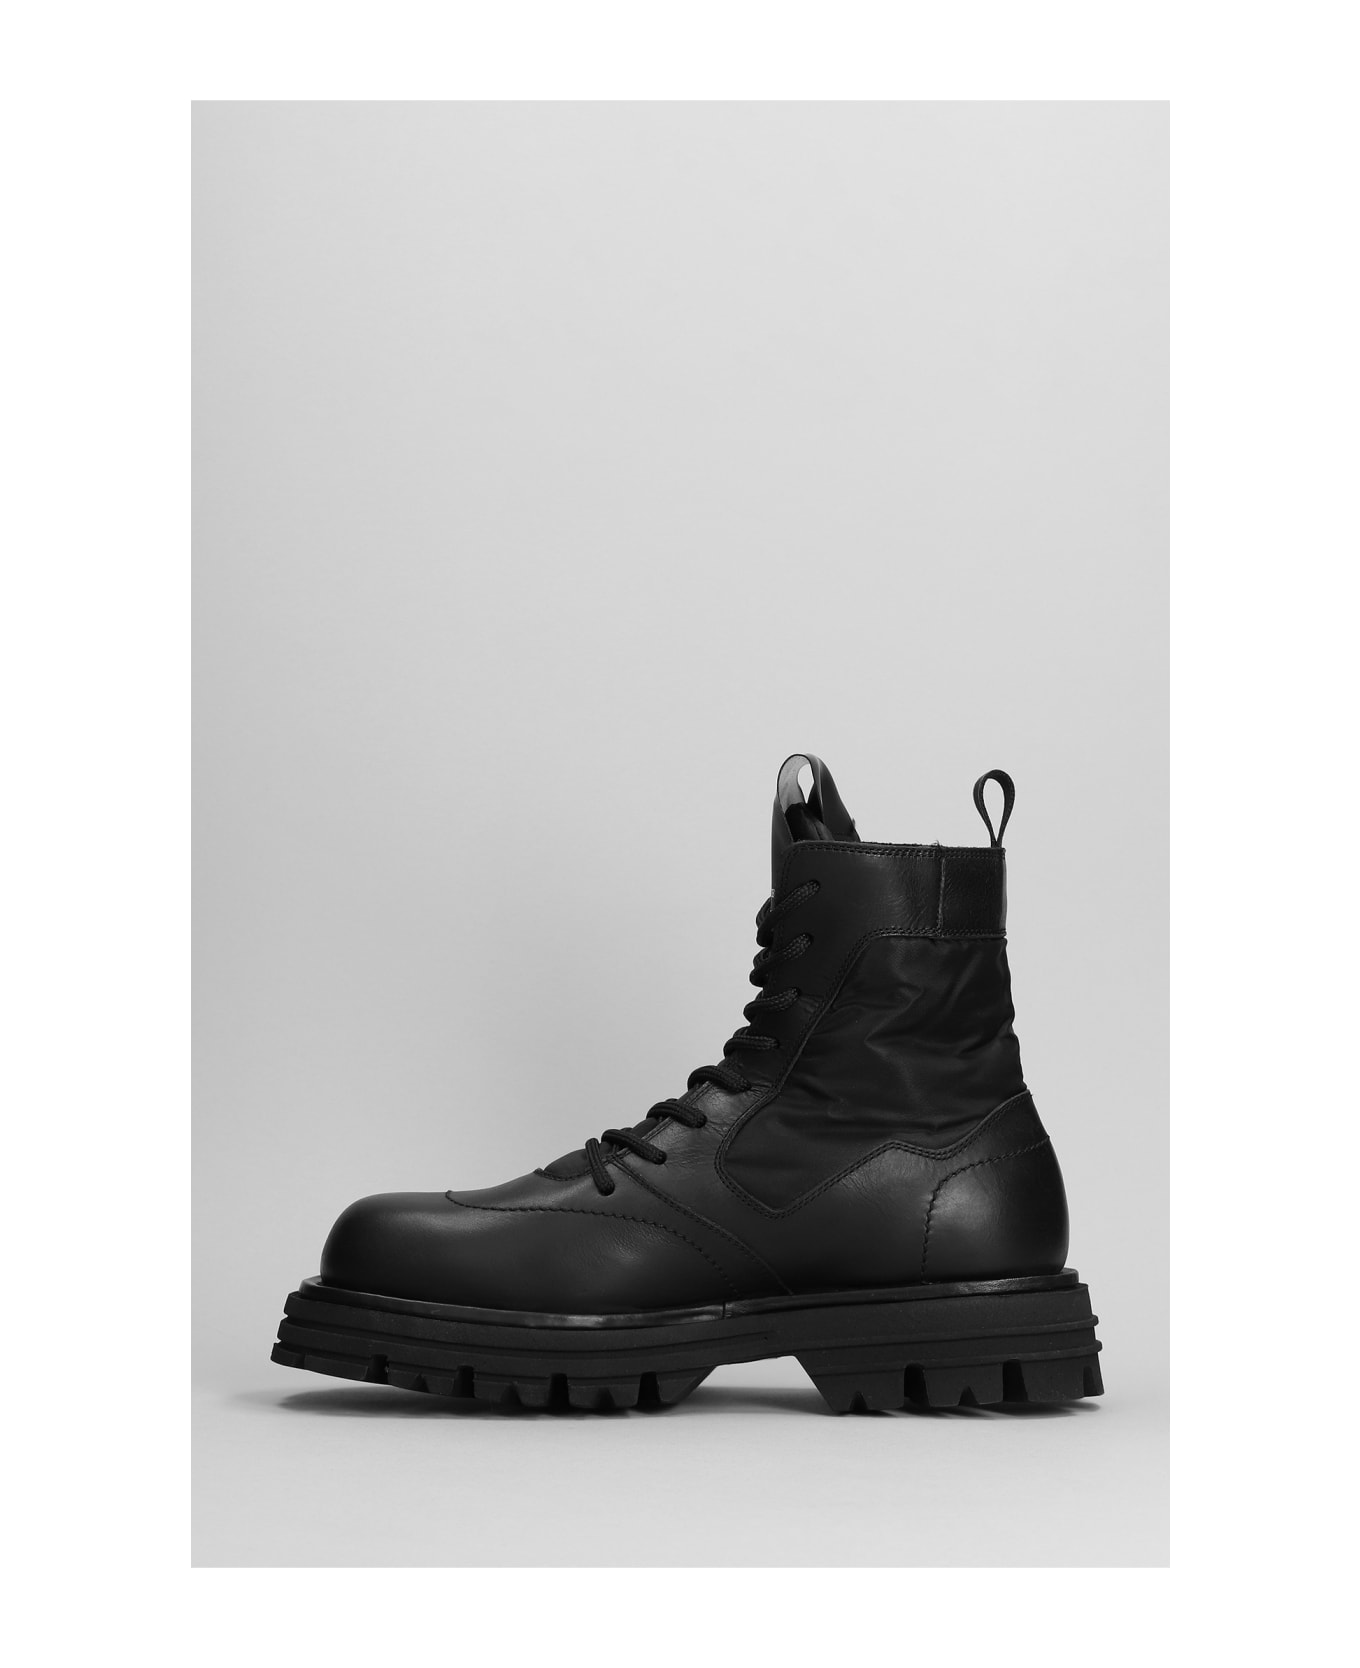 Barracuda Combat Boots In Black Leather And Fabric - black